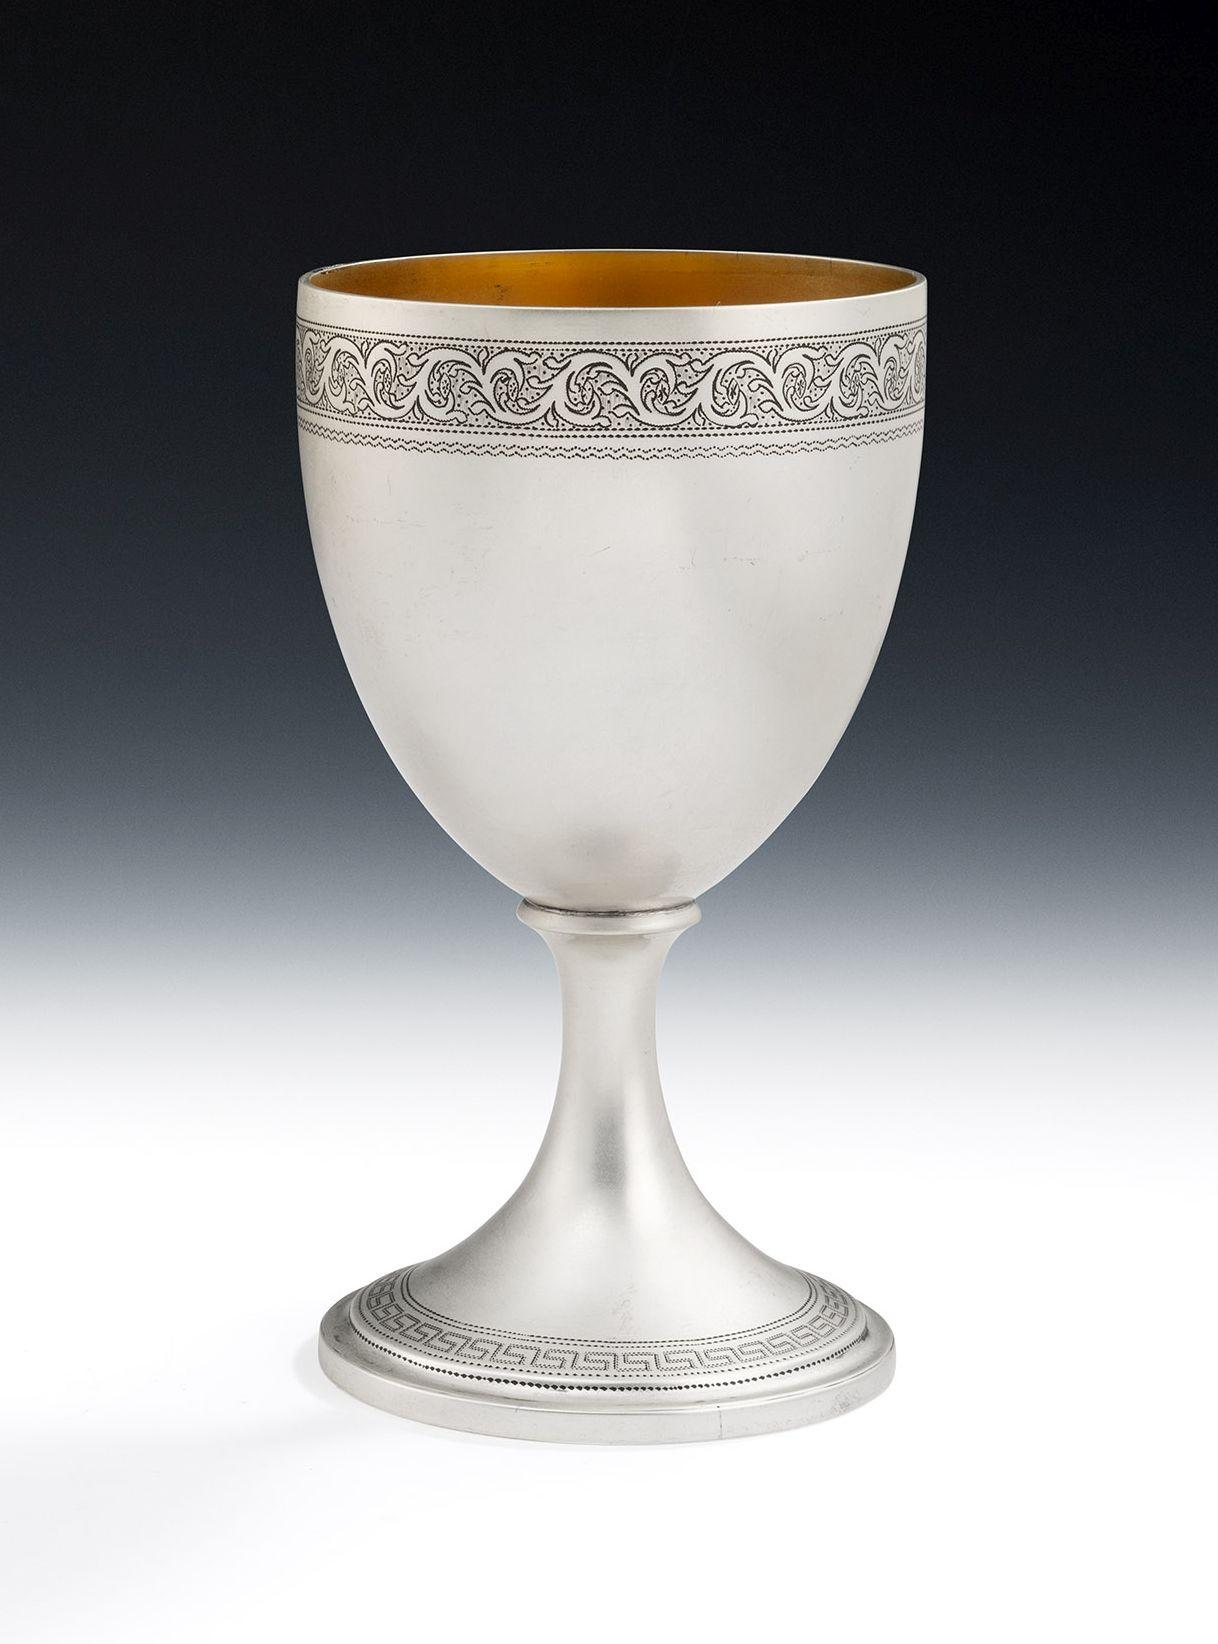 A very fine pair of George III Wine Goblets made in Edinburgh in 1806 by James Douglas.

The Goblets stand on a circular pedestal foot decorated with a Greek key and prick dot band.  The vase shaped main body is decorated at the rim with a band of